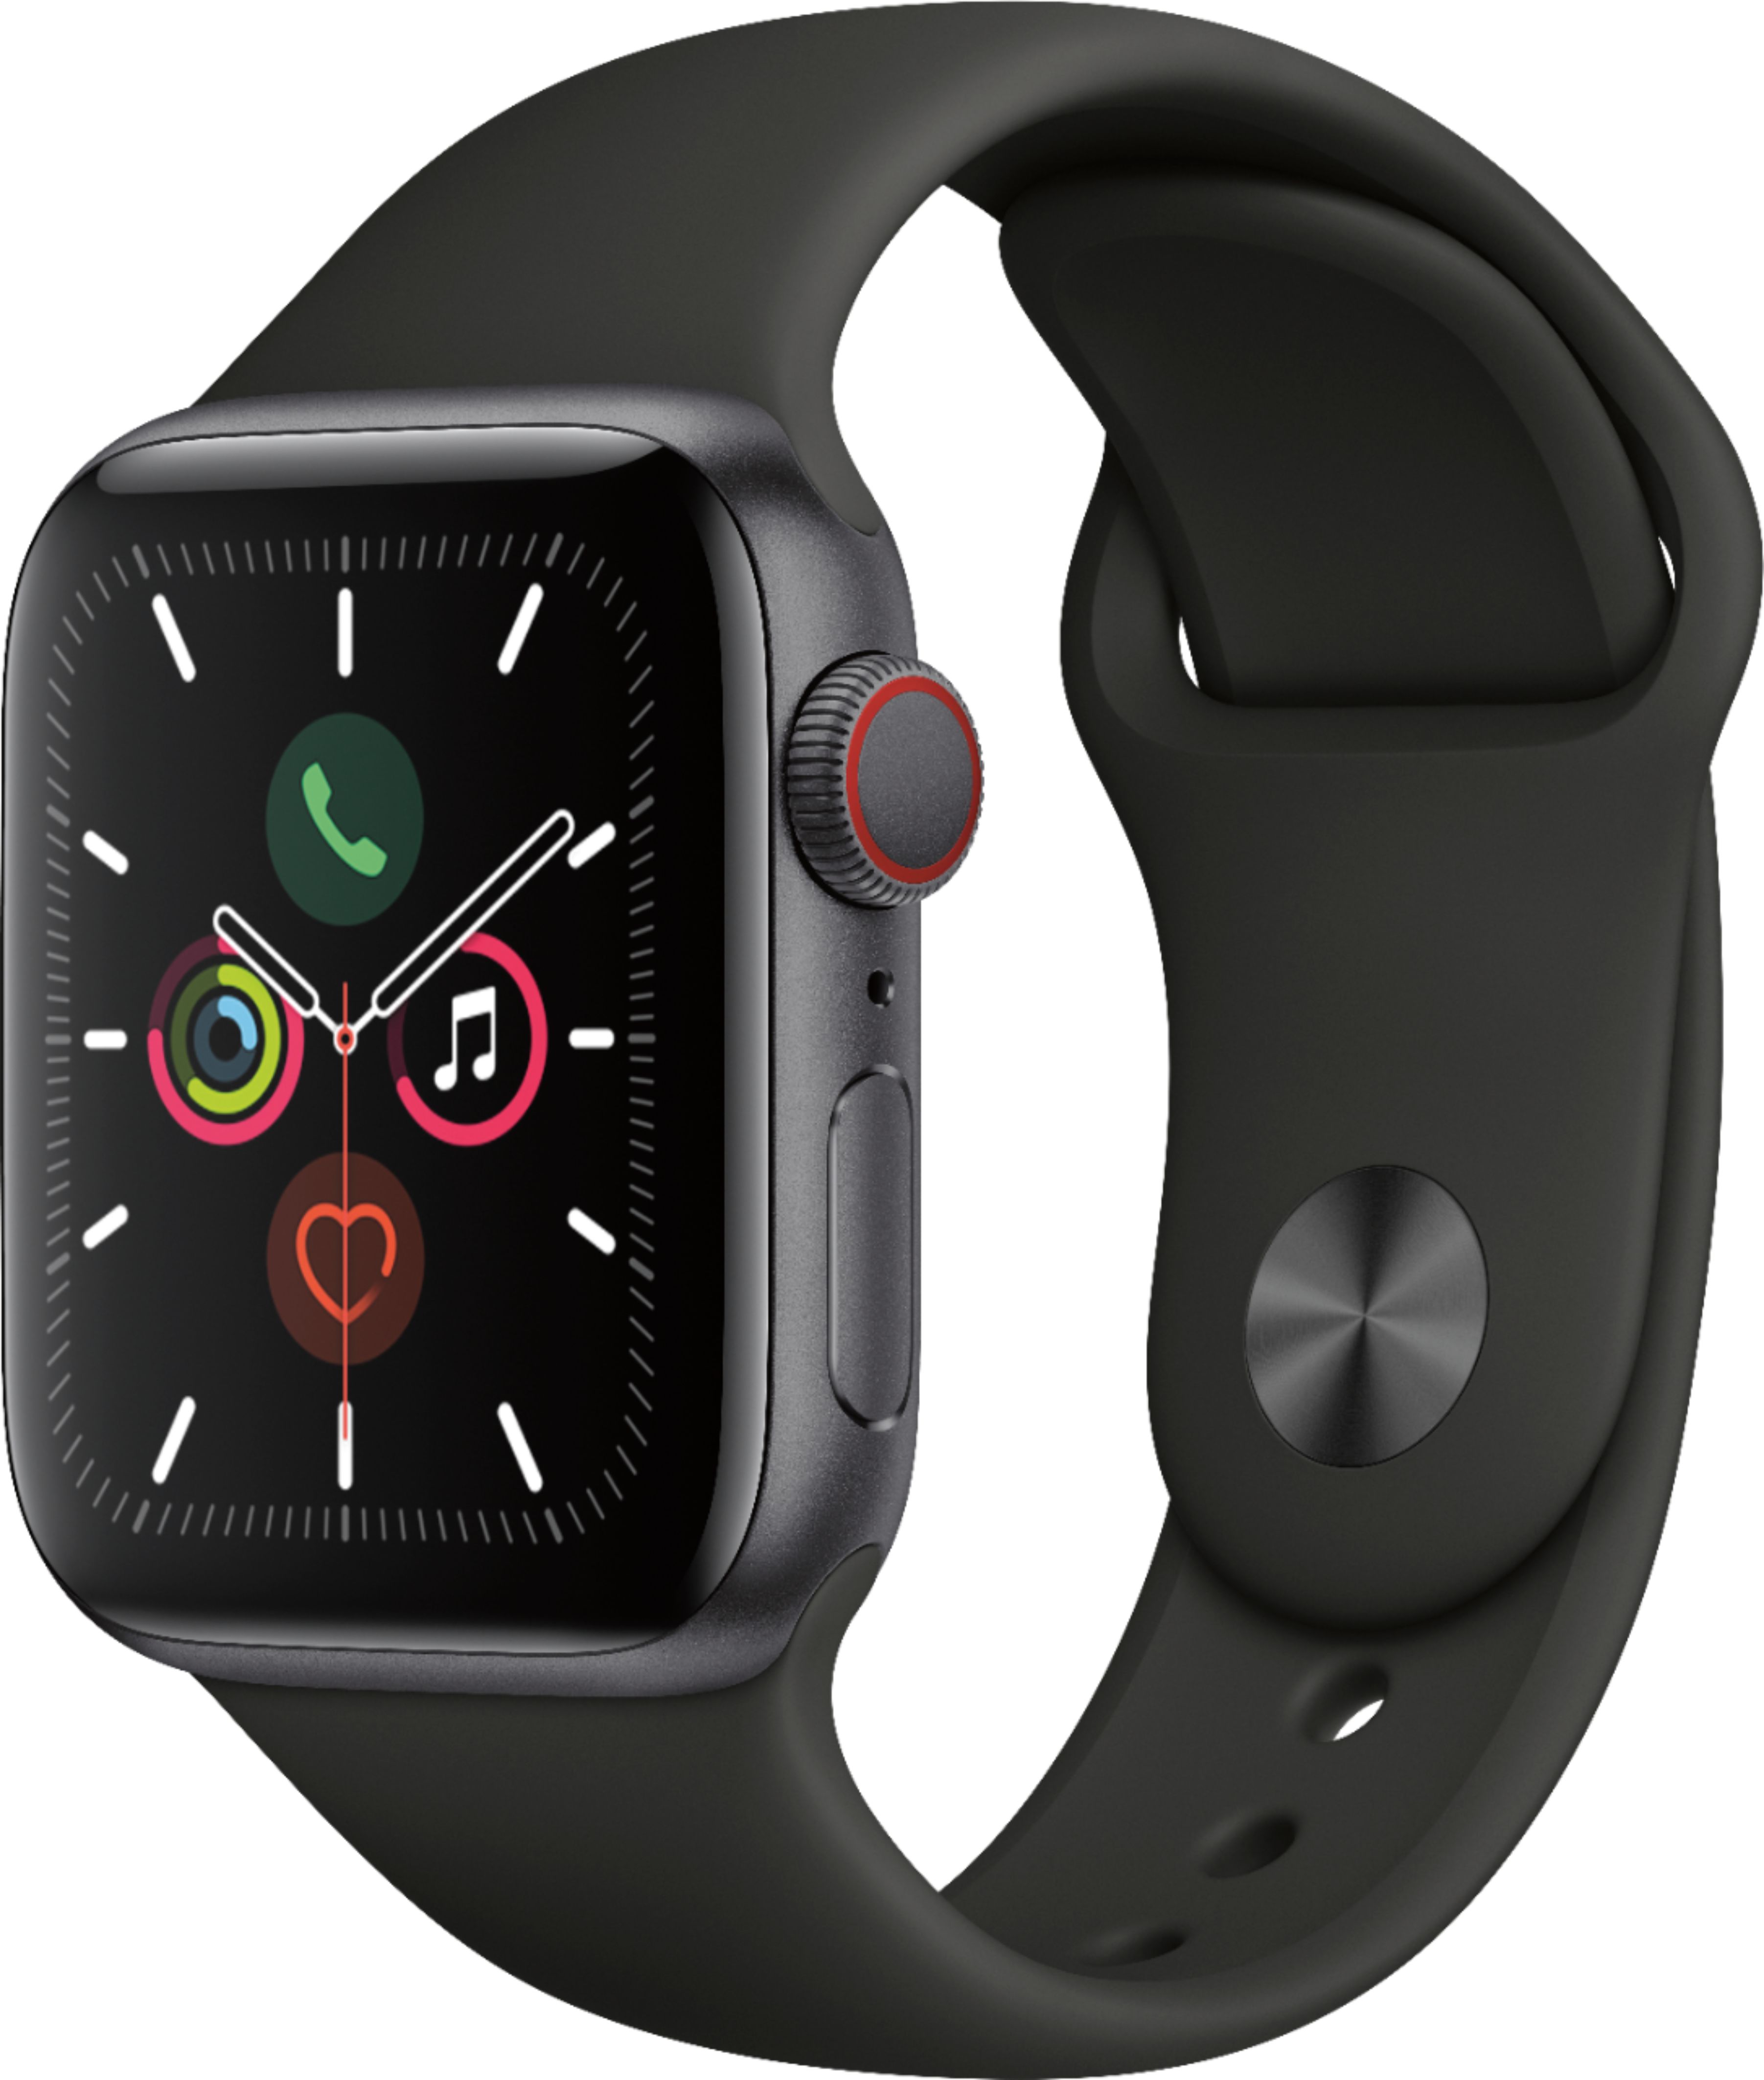 Apple Watch Series 5 (GPS + Cellular) 40mm Stainless Steel Case with Black  Sport Band Space Black Stainless Steel MWWW2LL/A - Best Buy